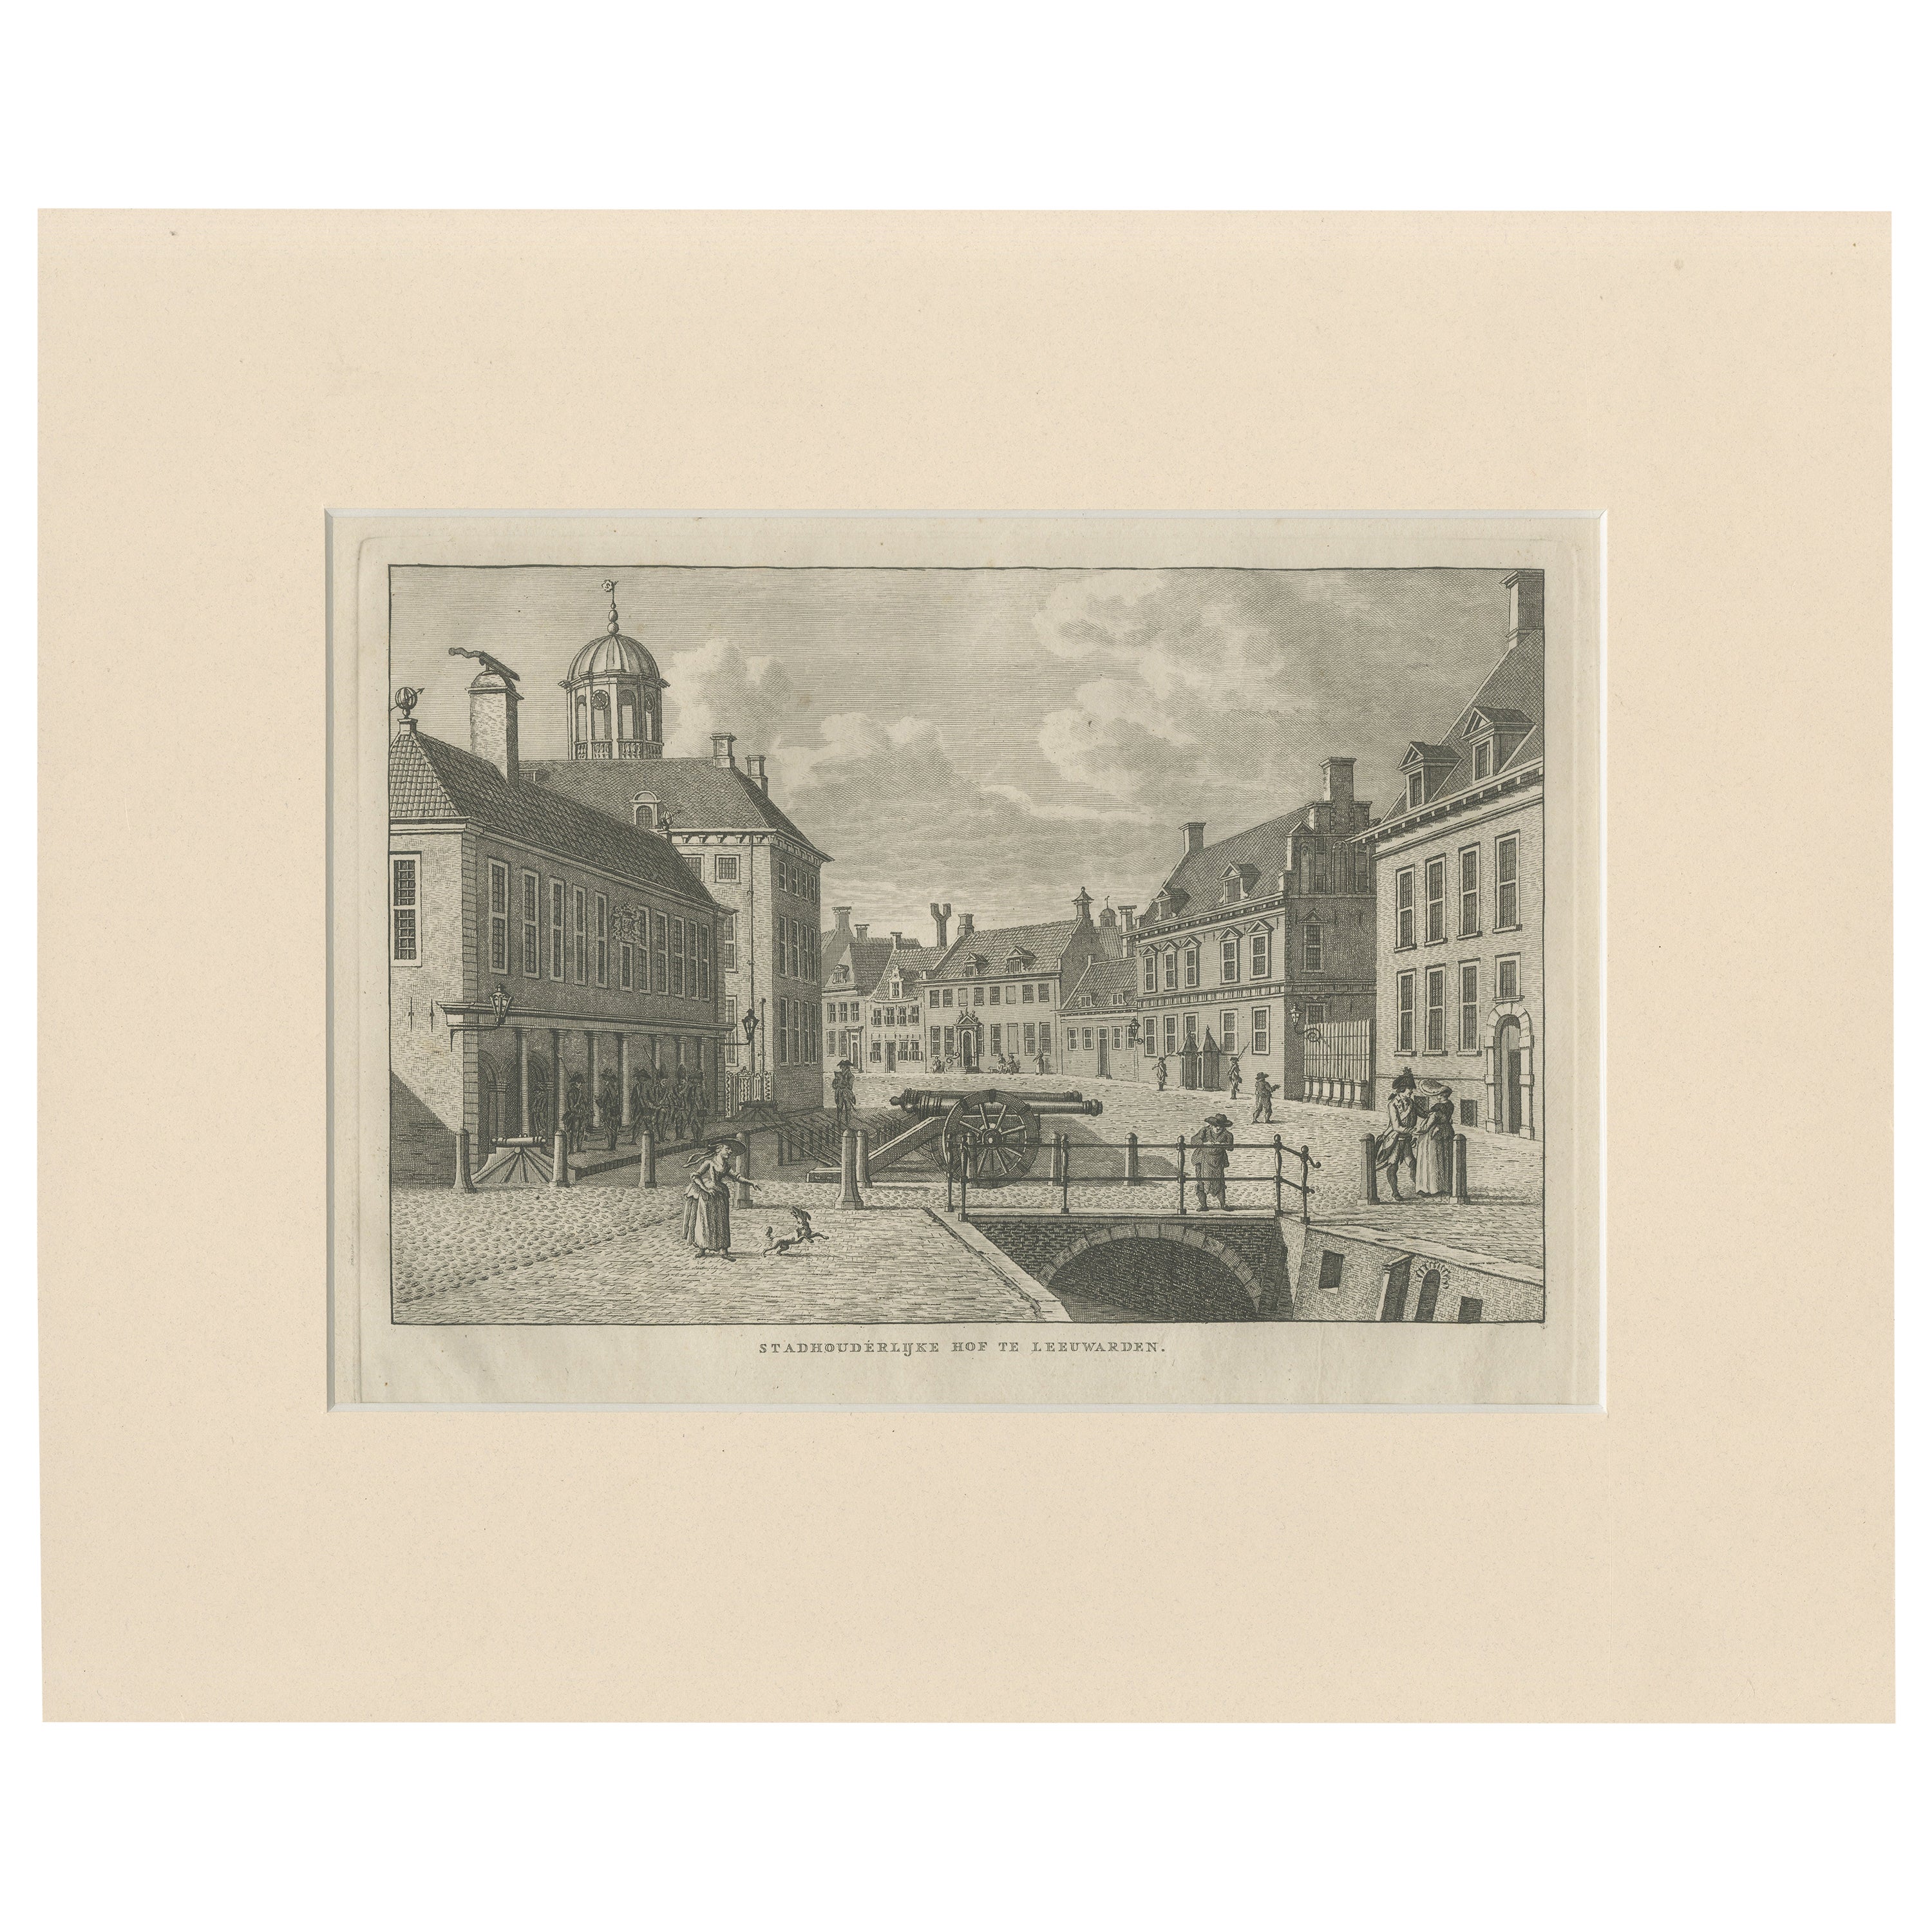 Antique Print of the Courtyard of Leeuwarden, Friesland, The Netherlands, c.1790